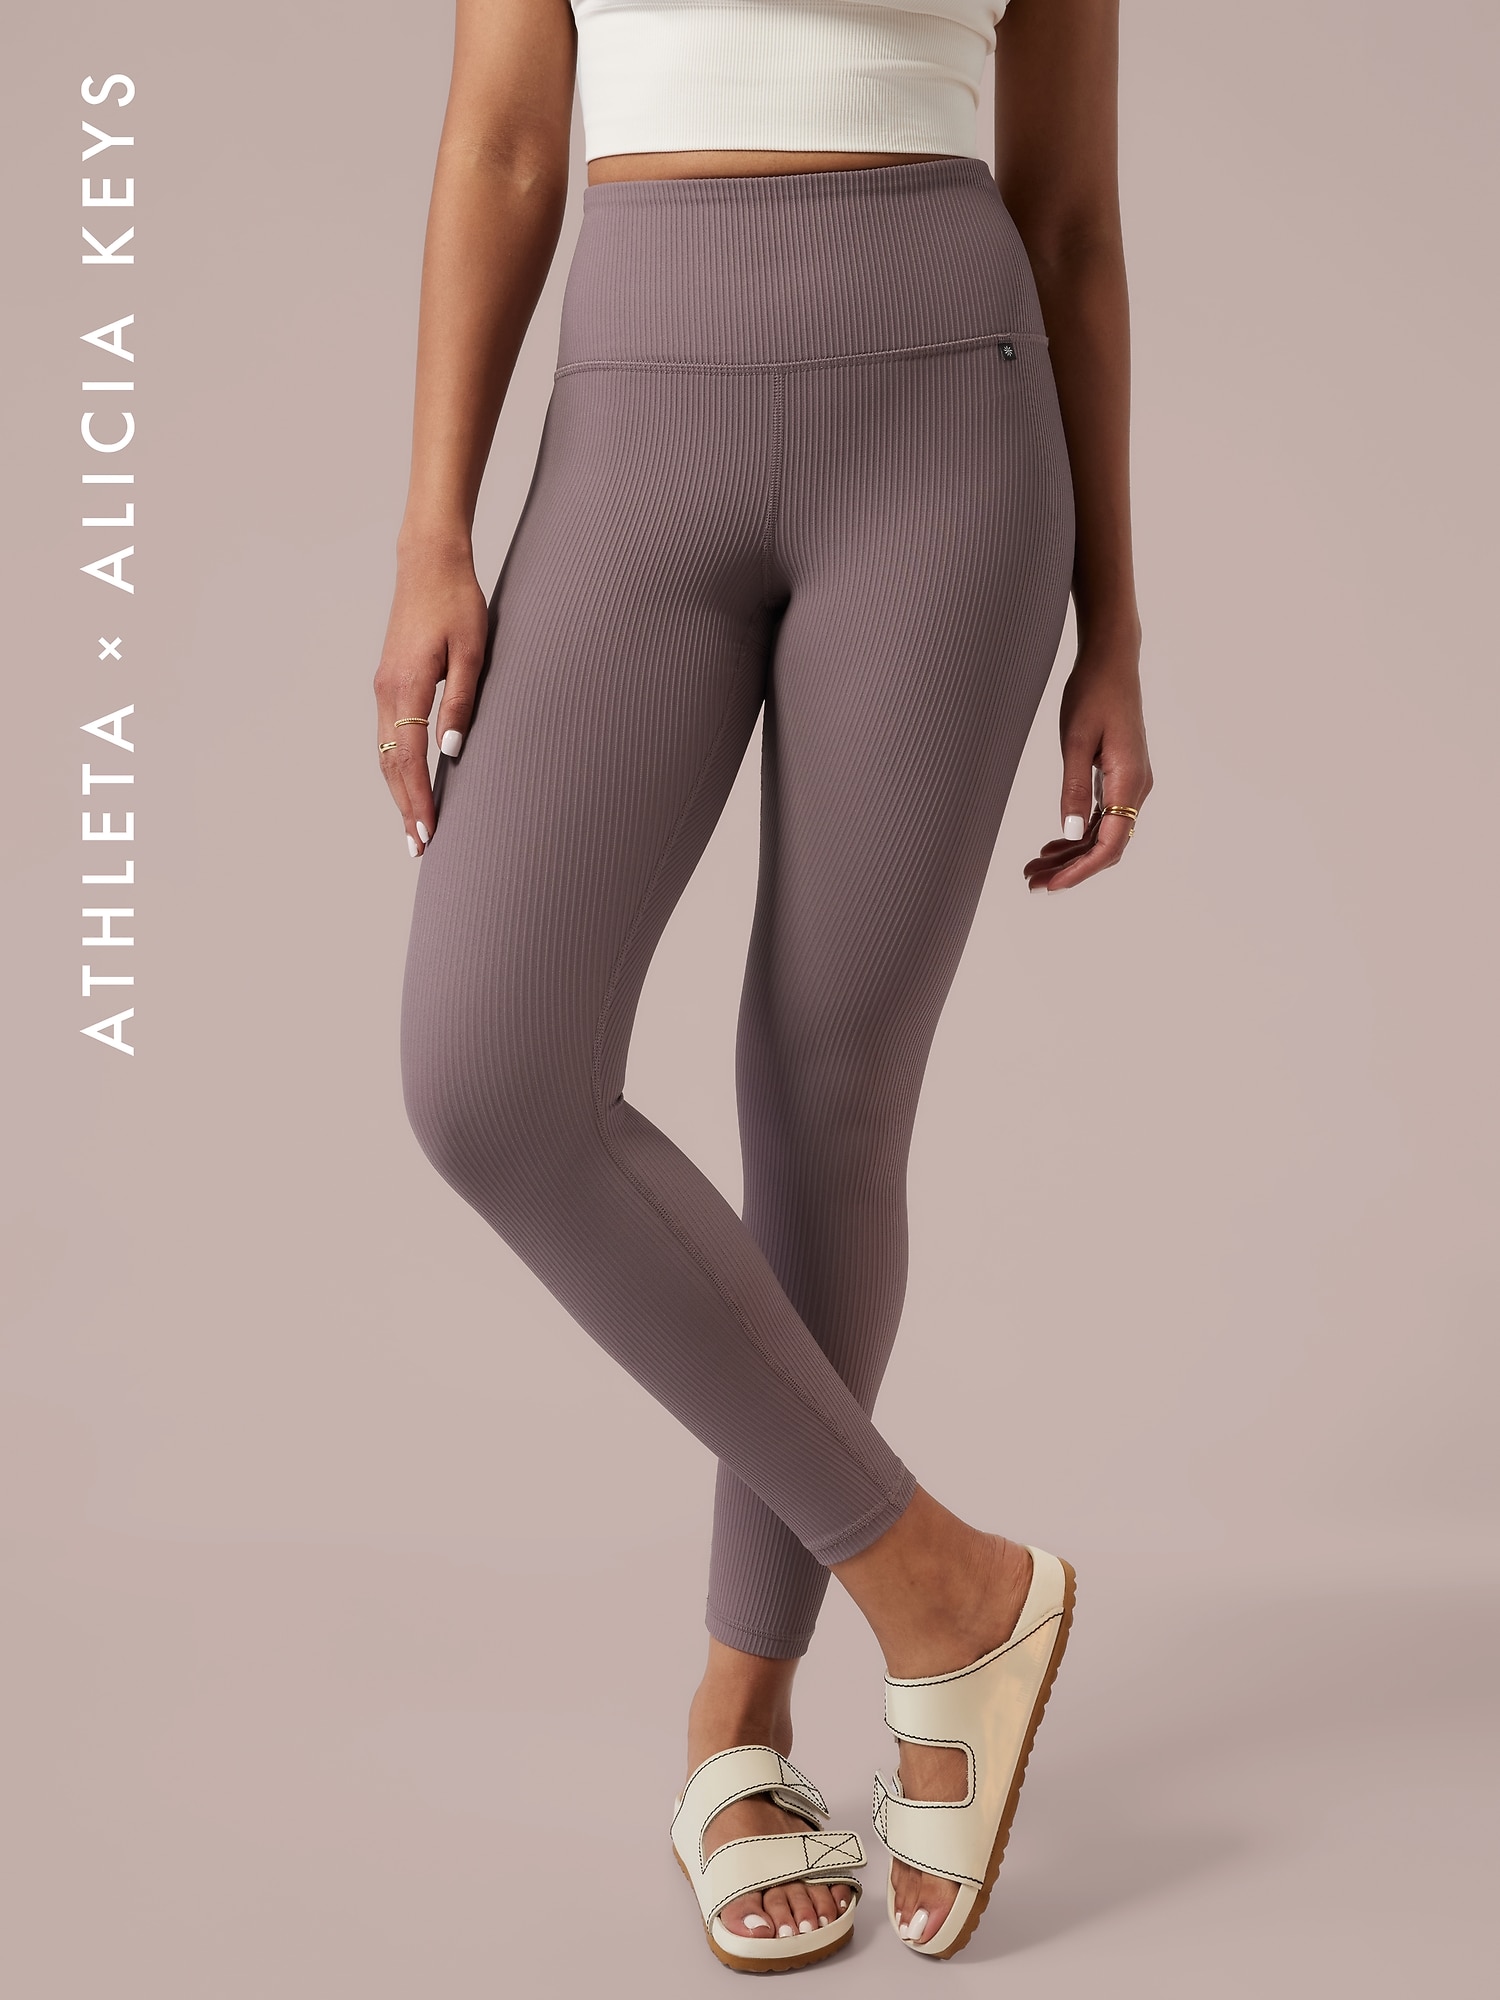 Light N Tight Leggings by Calison Weiss Zyia Active Independent Rep in La  Crosse, WI - Alignable